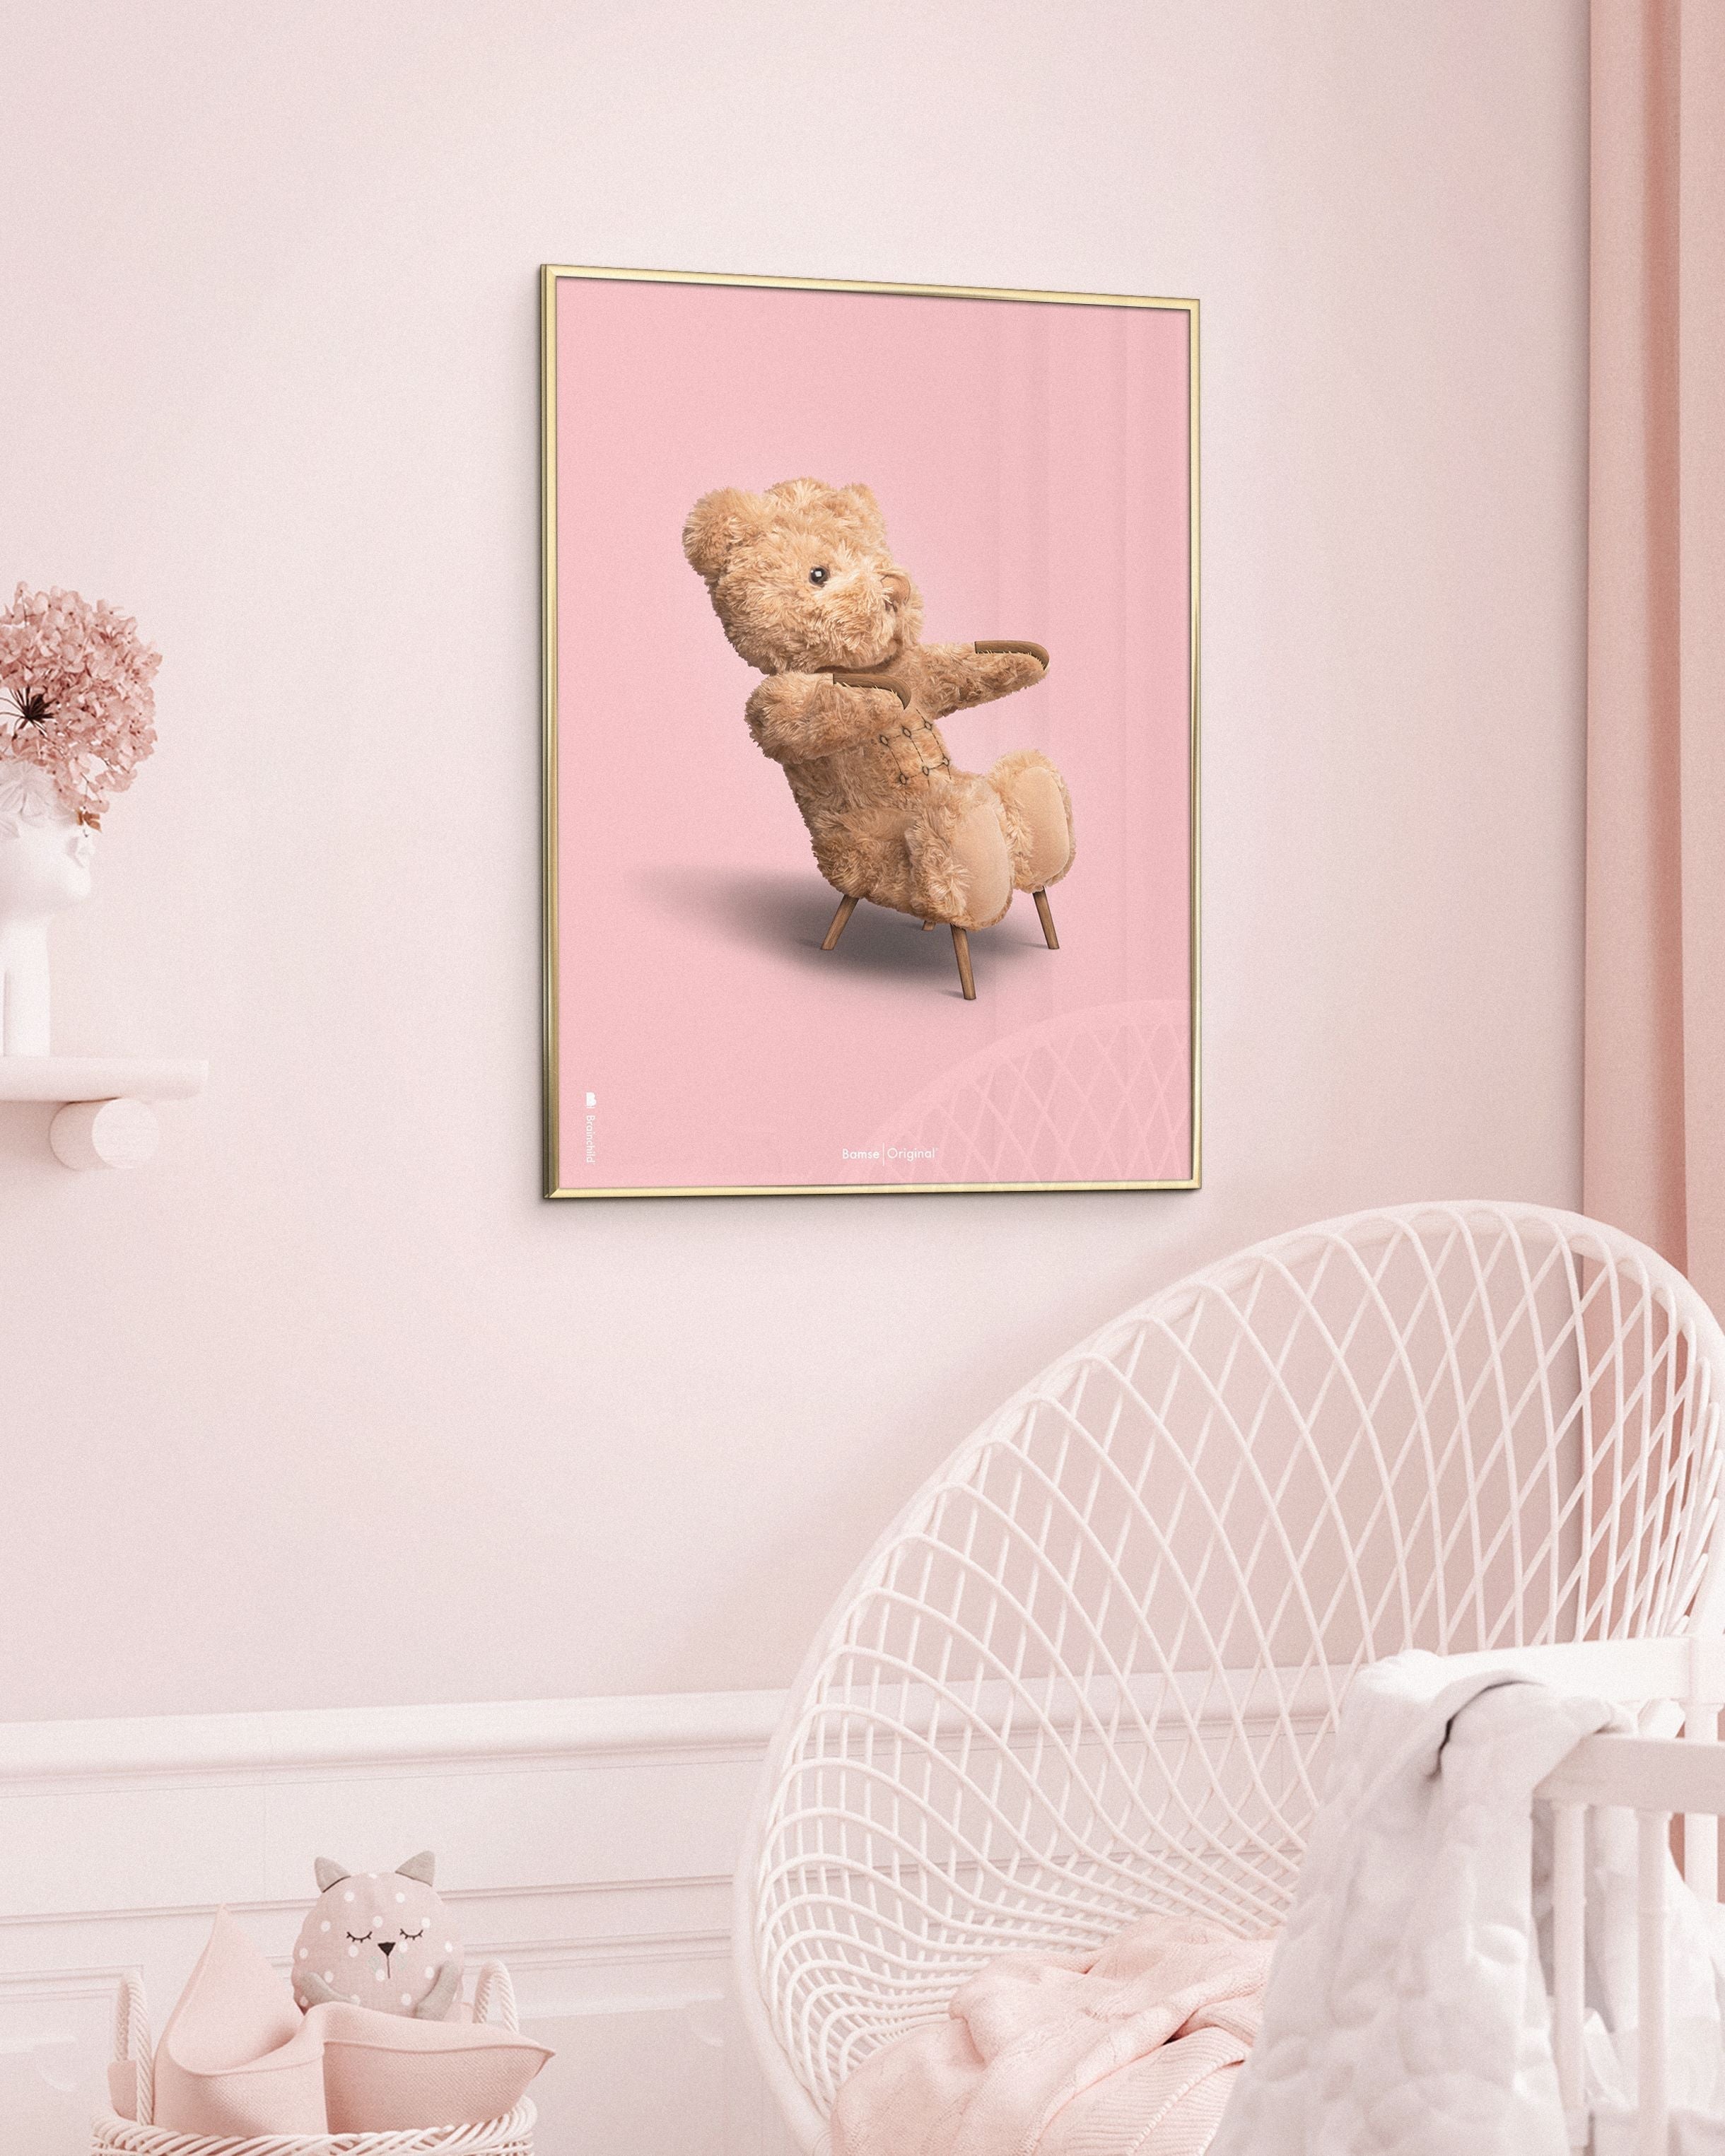 Brainchild Teddy Bear Classic Poster Brass Colored Frame 70x100 Cm, Pink Background